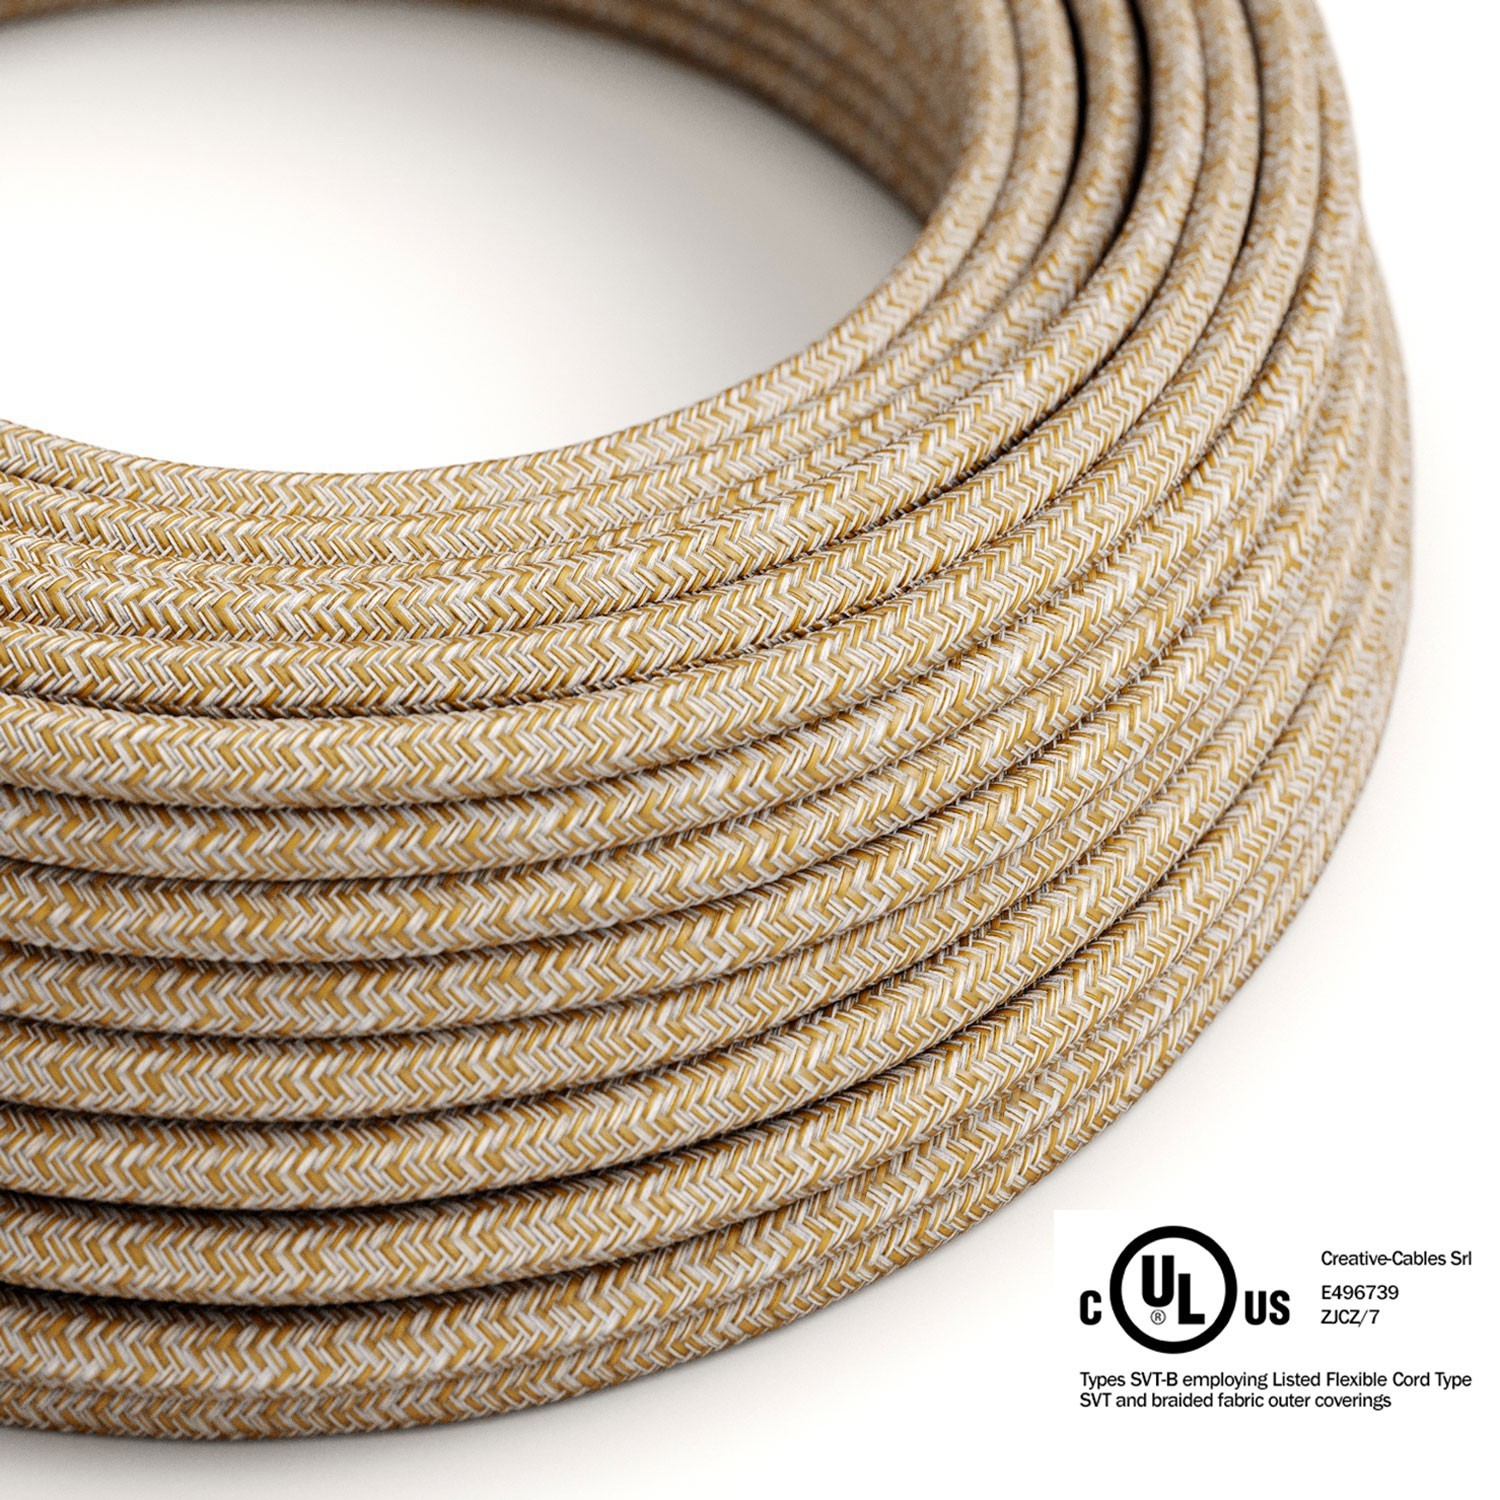 Round Electric Cable 150 ft (45,72 m) coil RS82 Glittering Russet Cotton and Natural Linen - UL listed